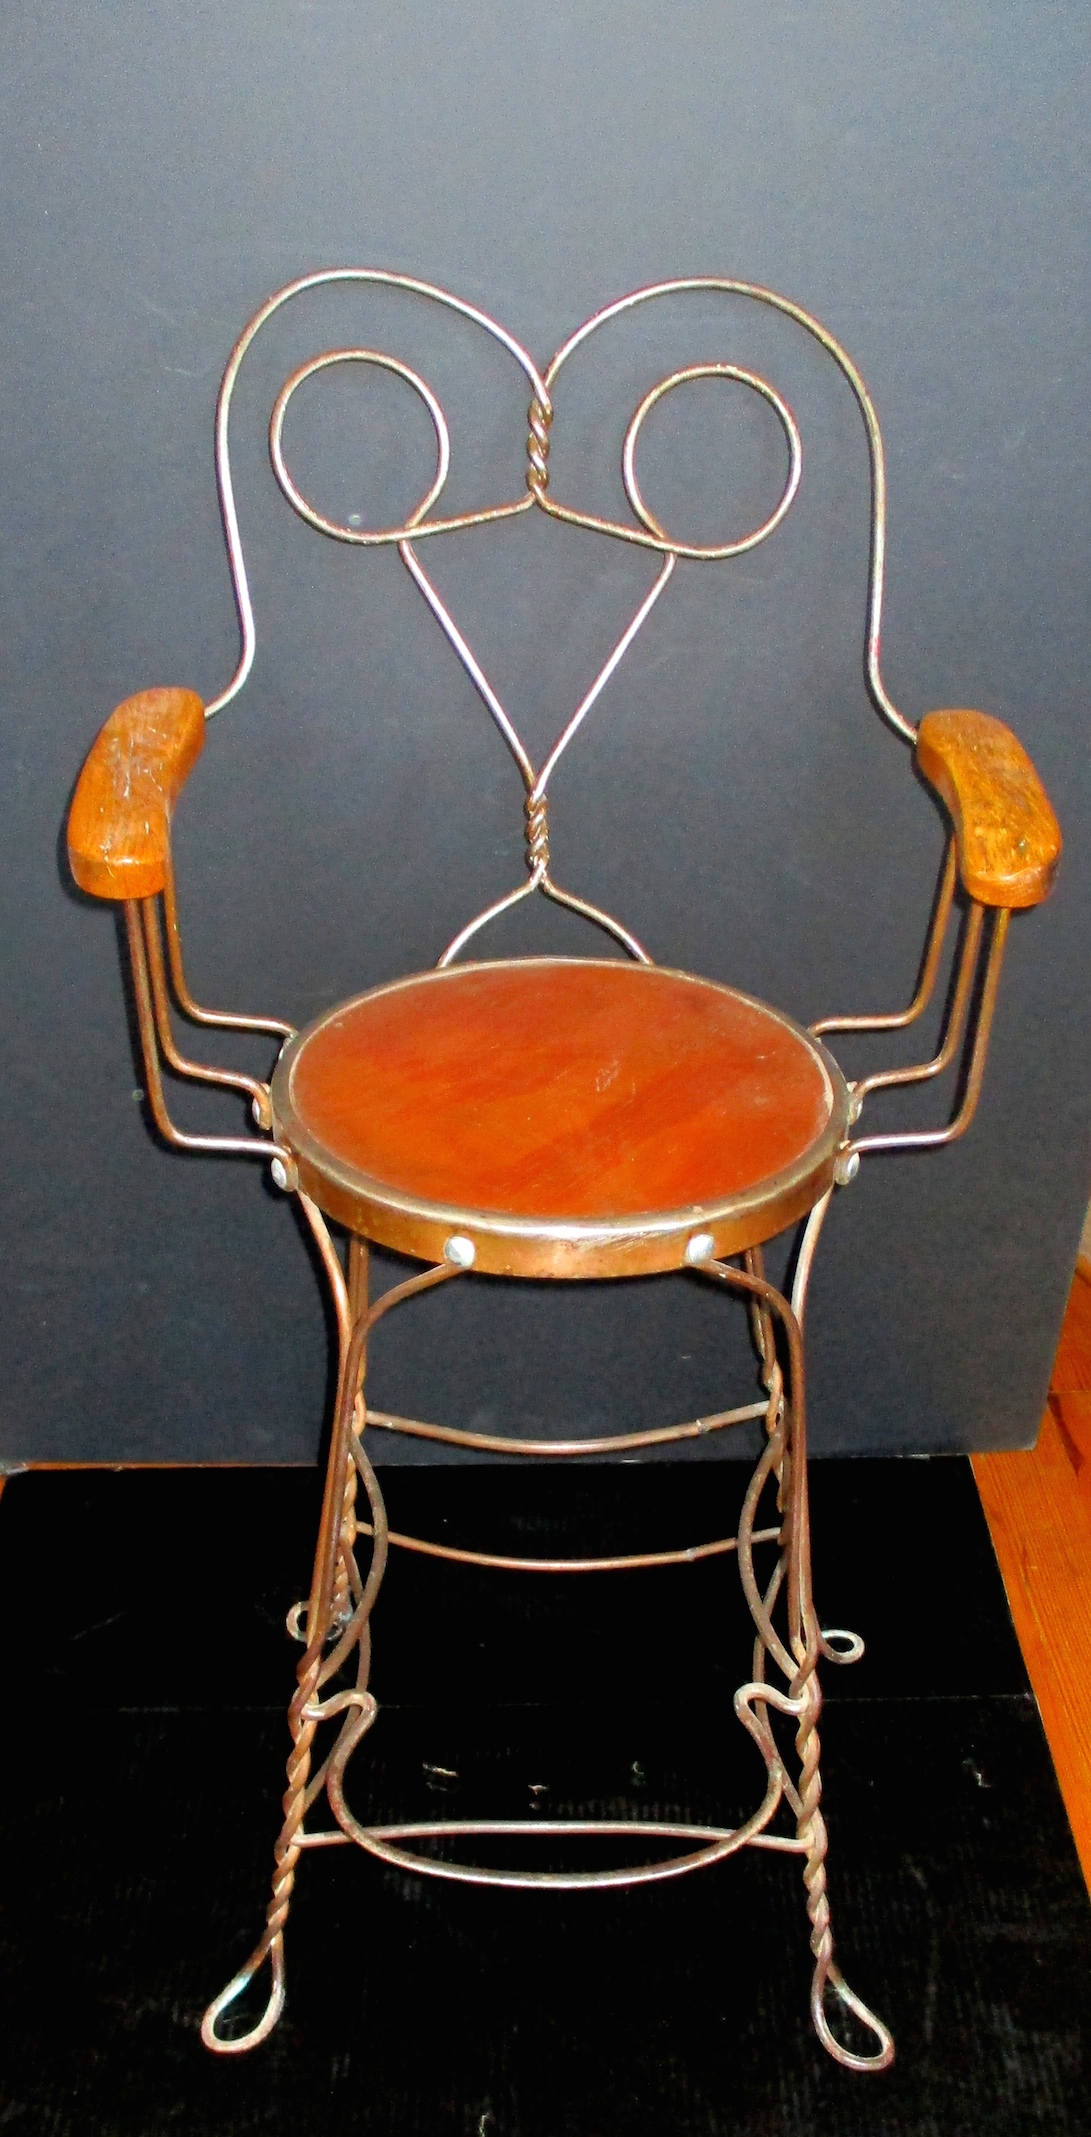 Twisted Wire Armed Billiards Chair